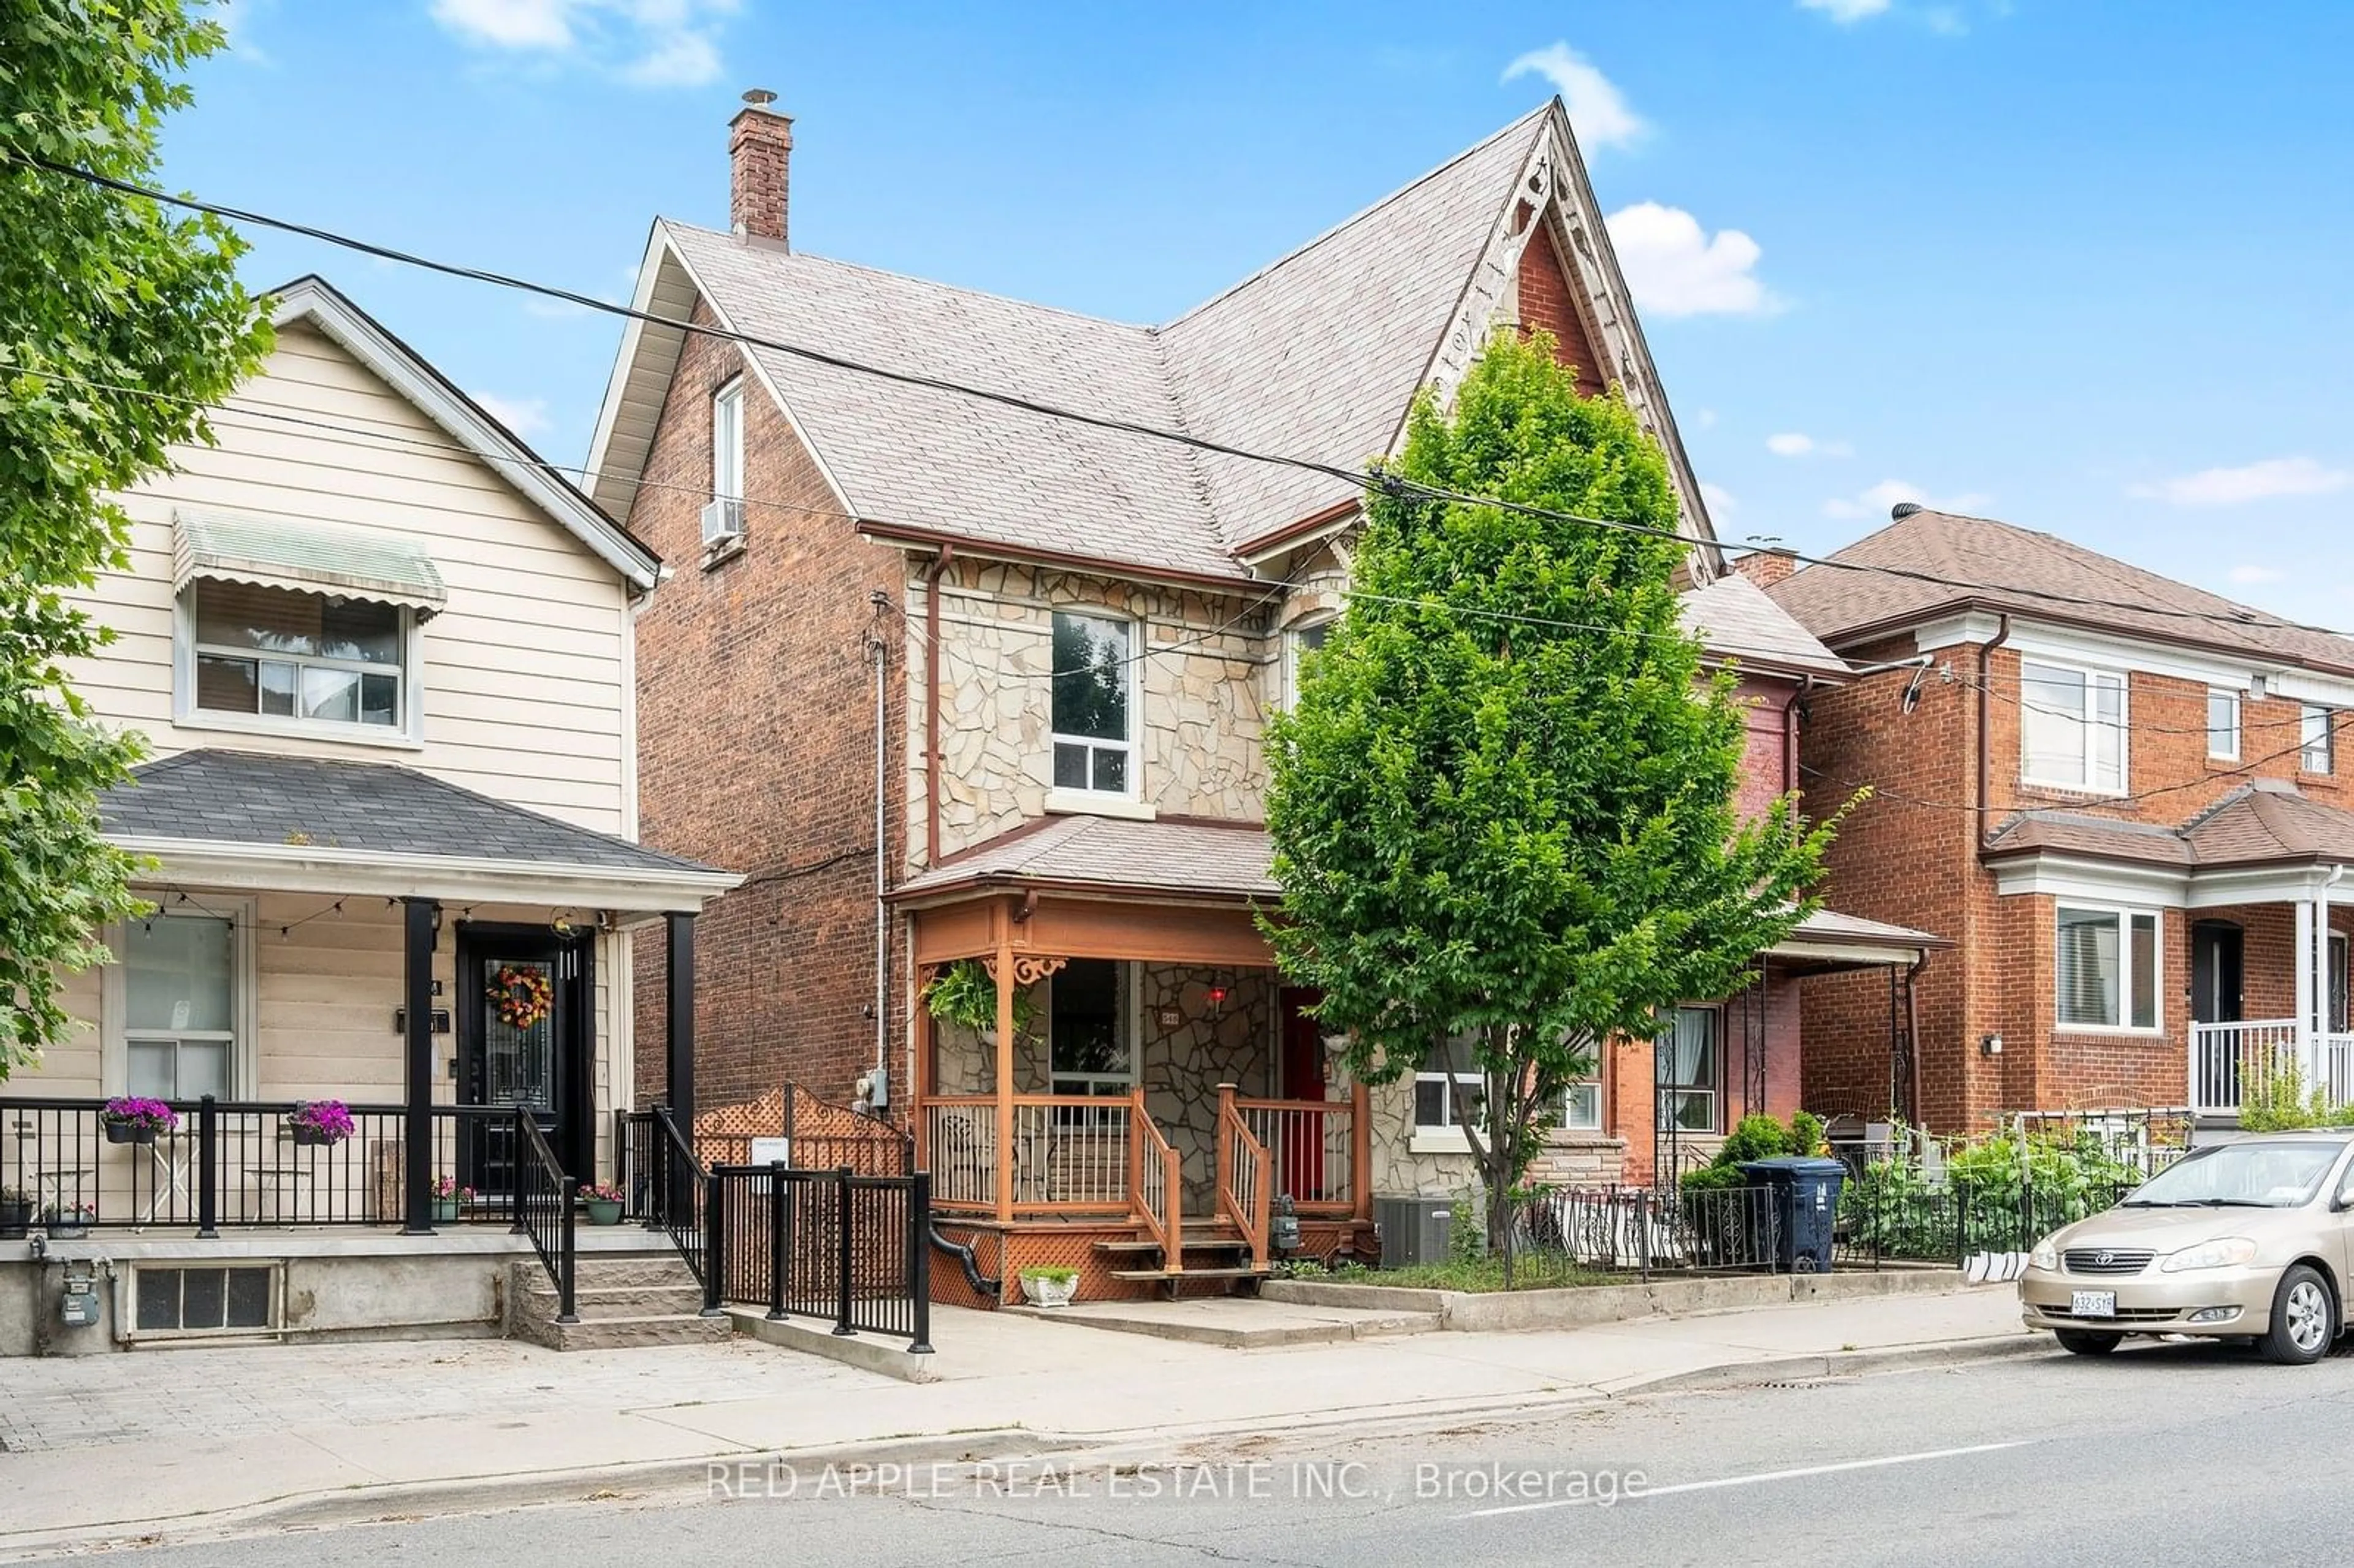 Home with brick exterior material for 546 Dufferin St, Toronto Ontario M6K 2A7